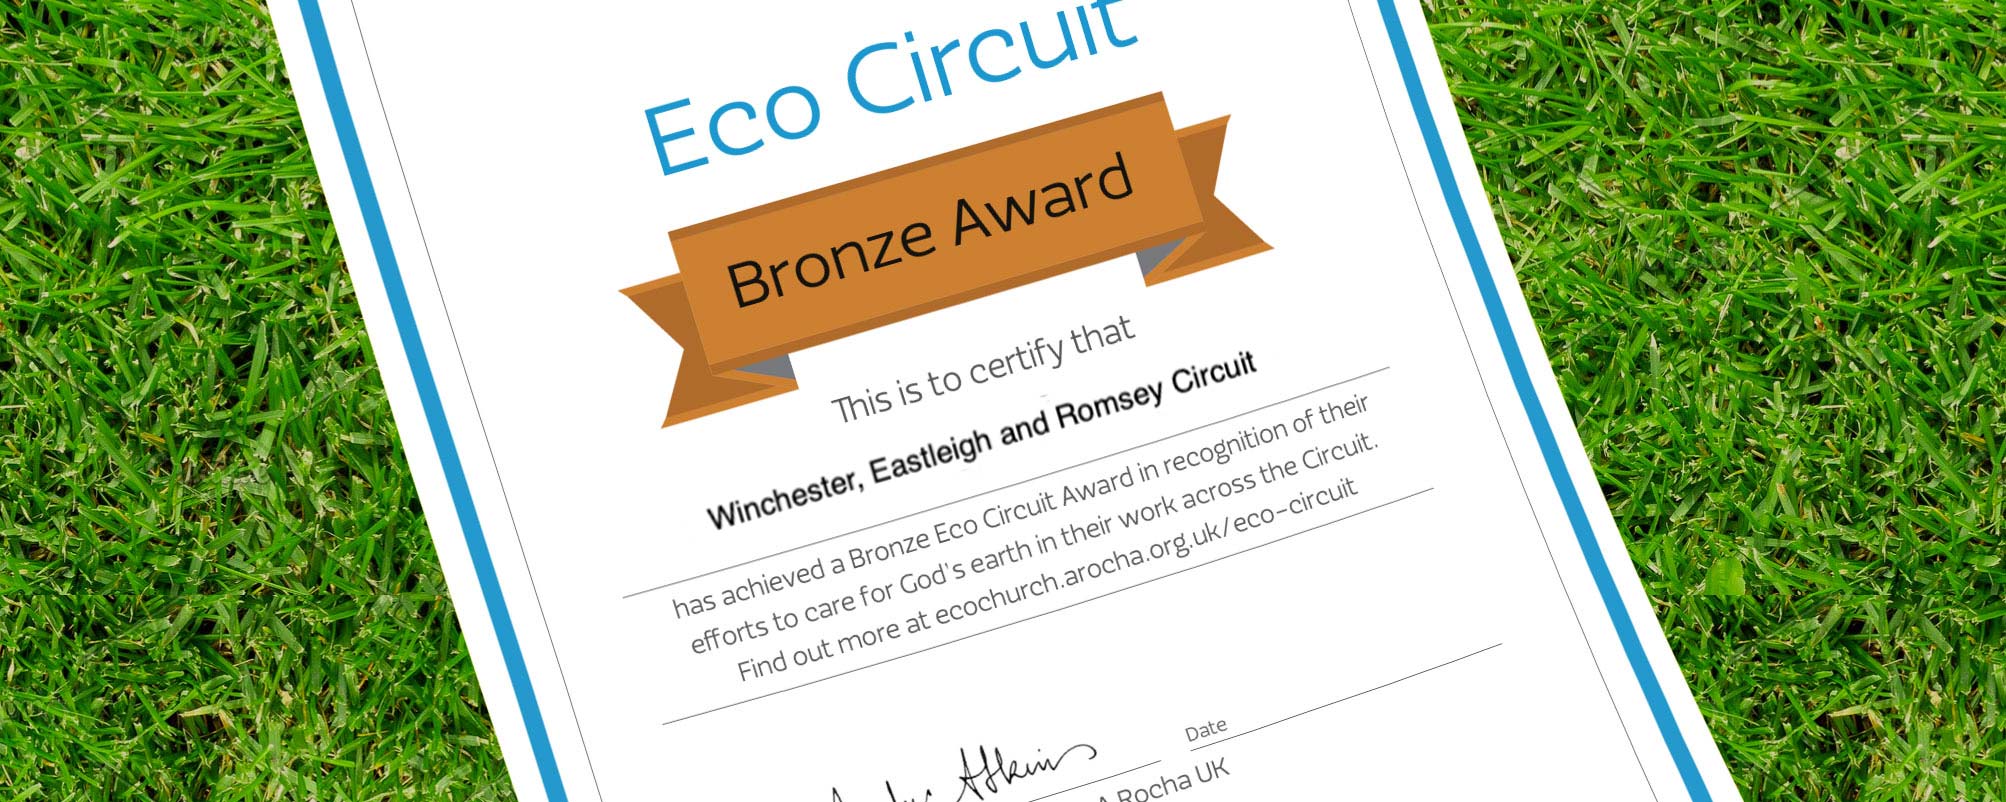 Featured image for “First Eco Circuit Award Achieved”